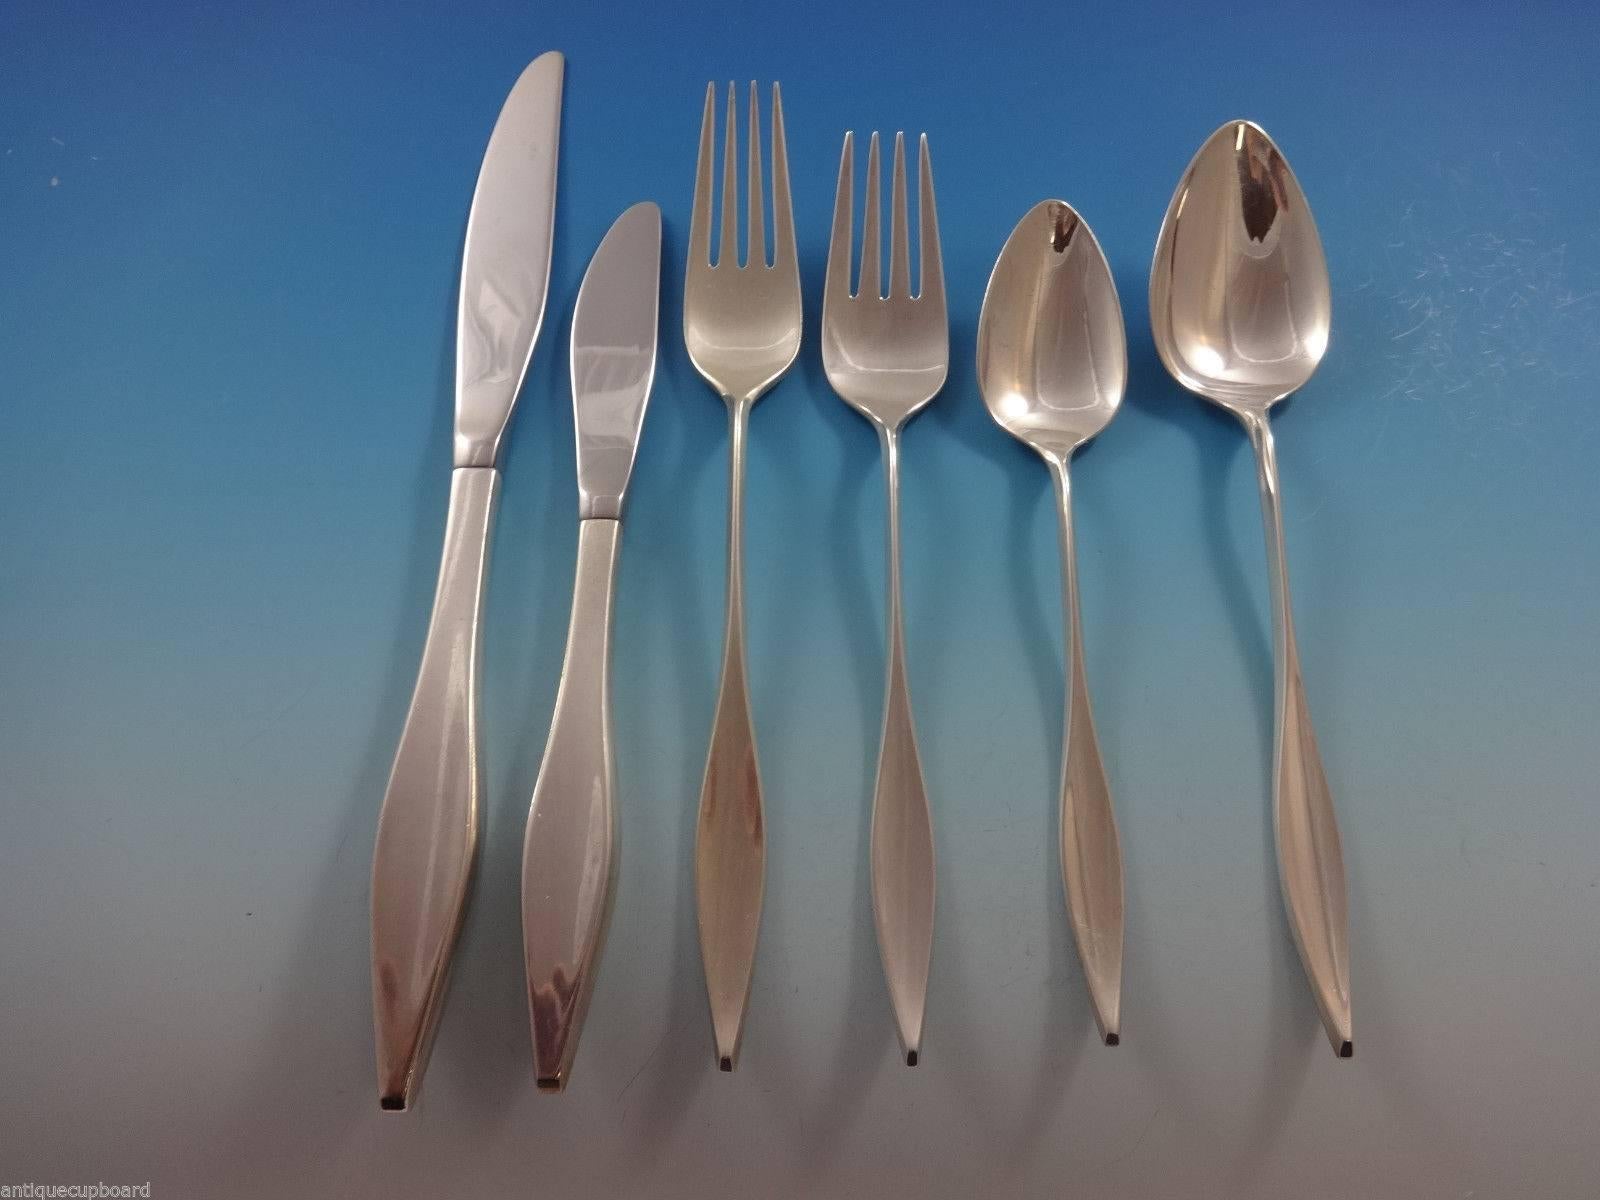 Huge Mid-Century Modern Lark by Reed & Barton sterling silver flatware set - 115 Pieces. Designed by John Prip. This set includes:

18 knives, 9